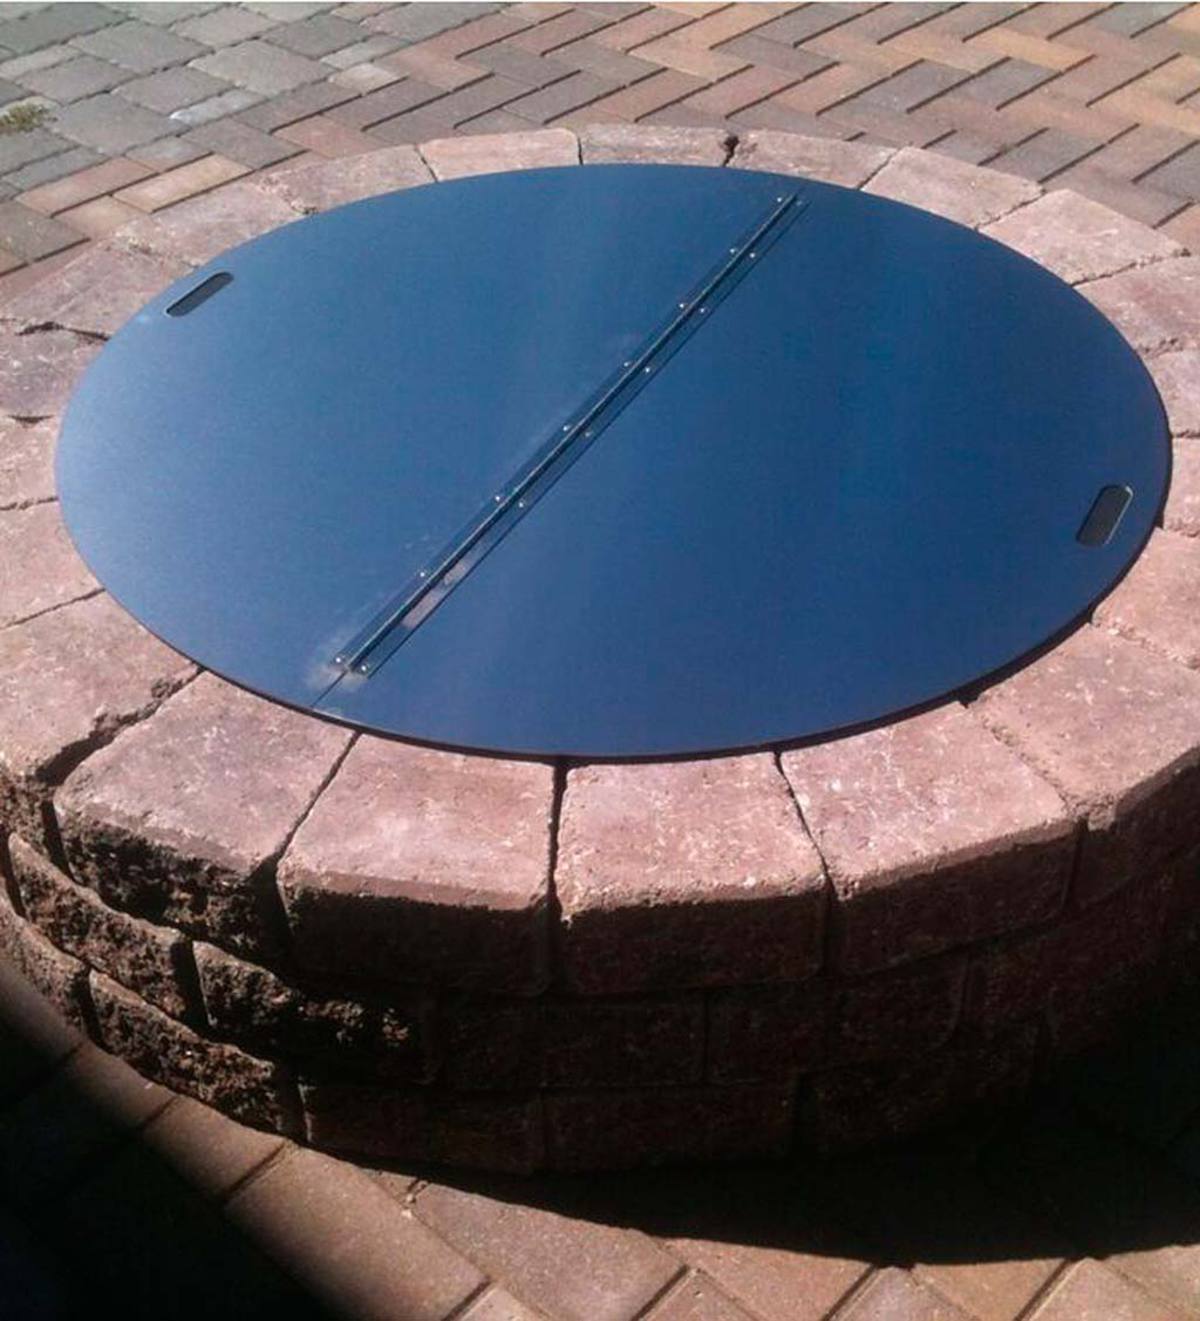 Stainless Steel Round Fire Pit Cover, Round Propane Fire Pit Cover